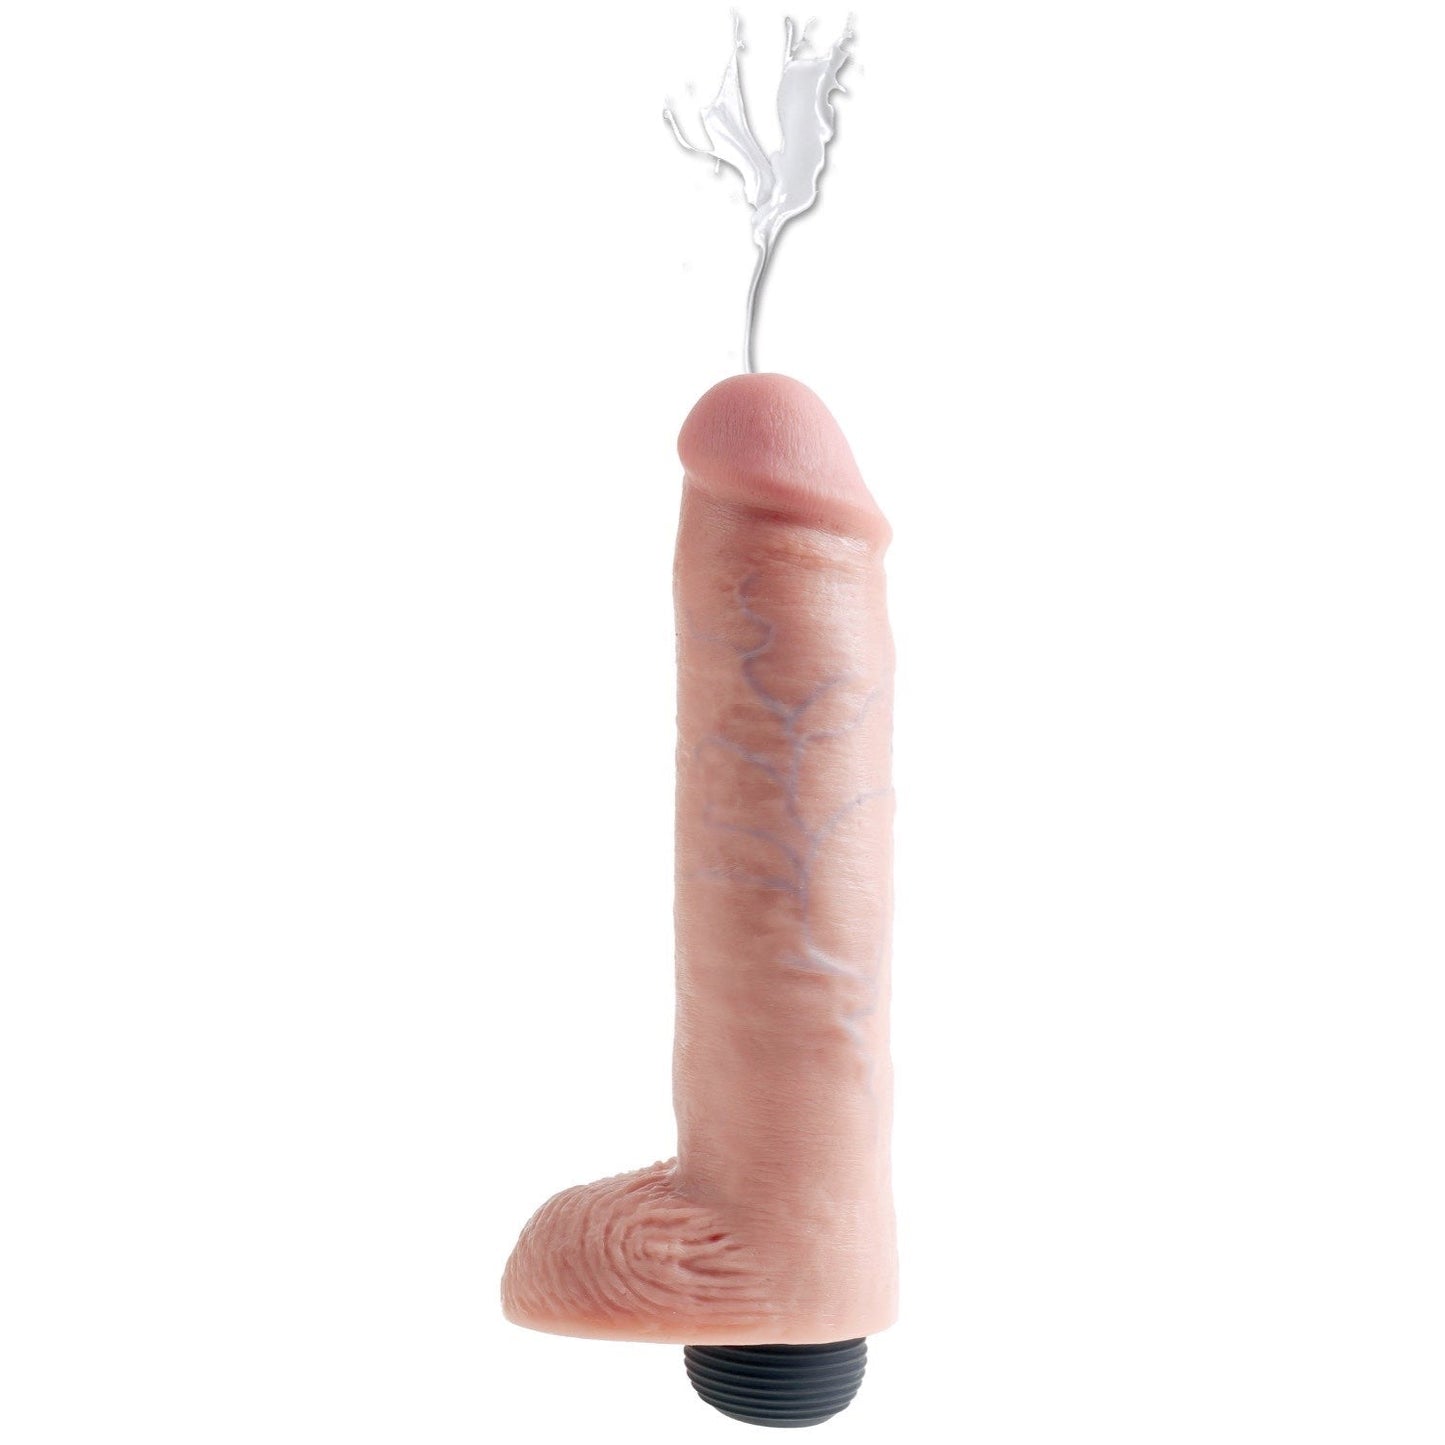 10" Squirting Dong With Balls - Flesh 25.4 cm (10") Squirting Dong